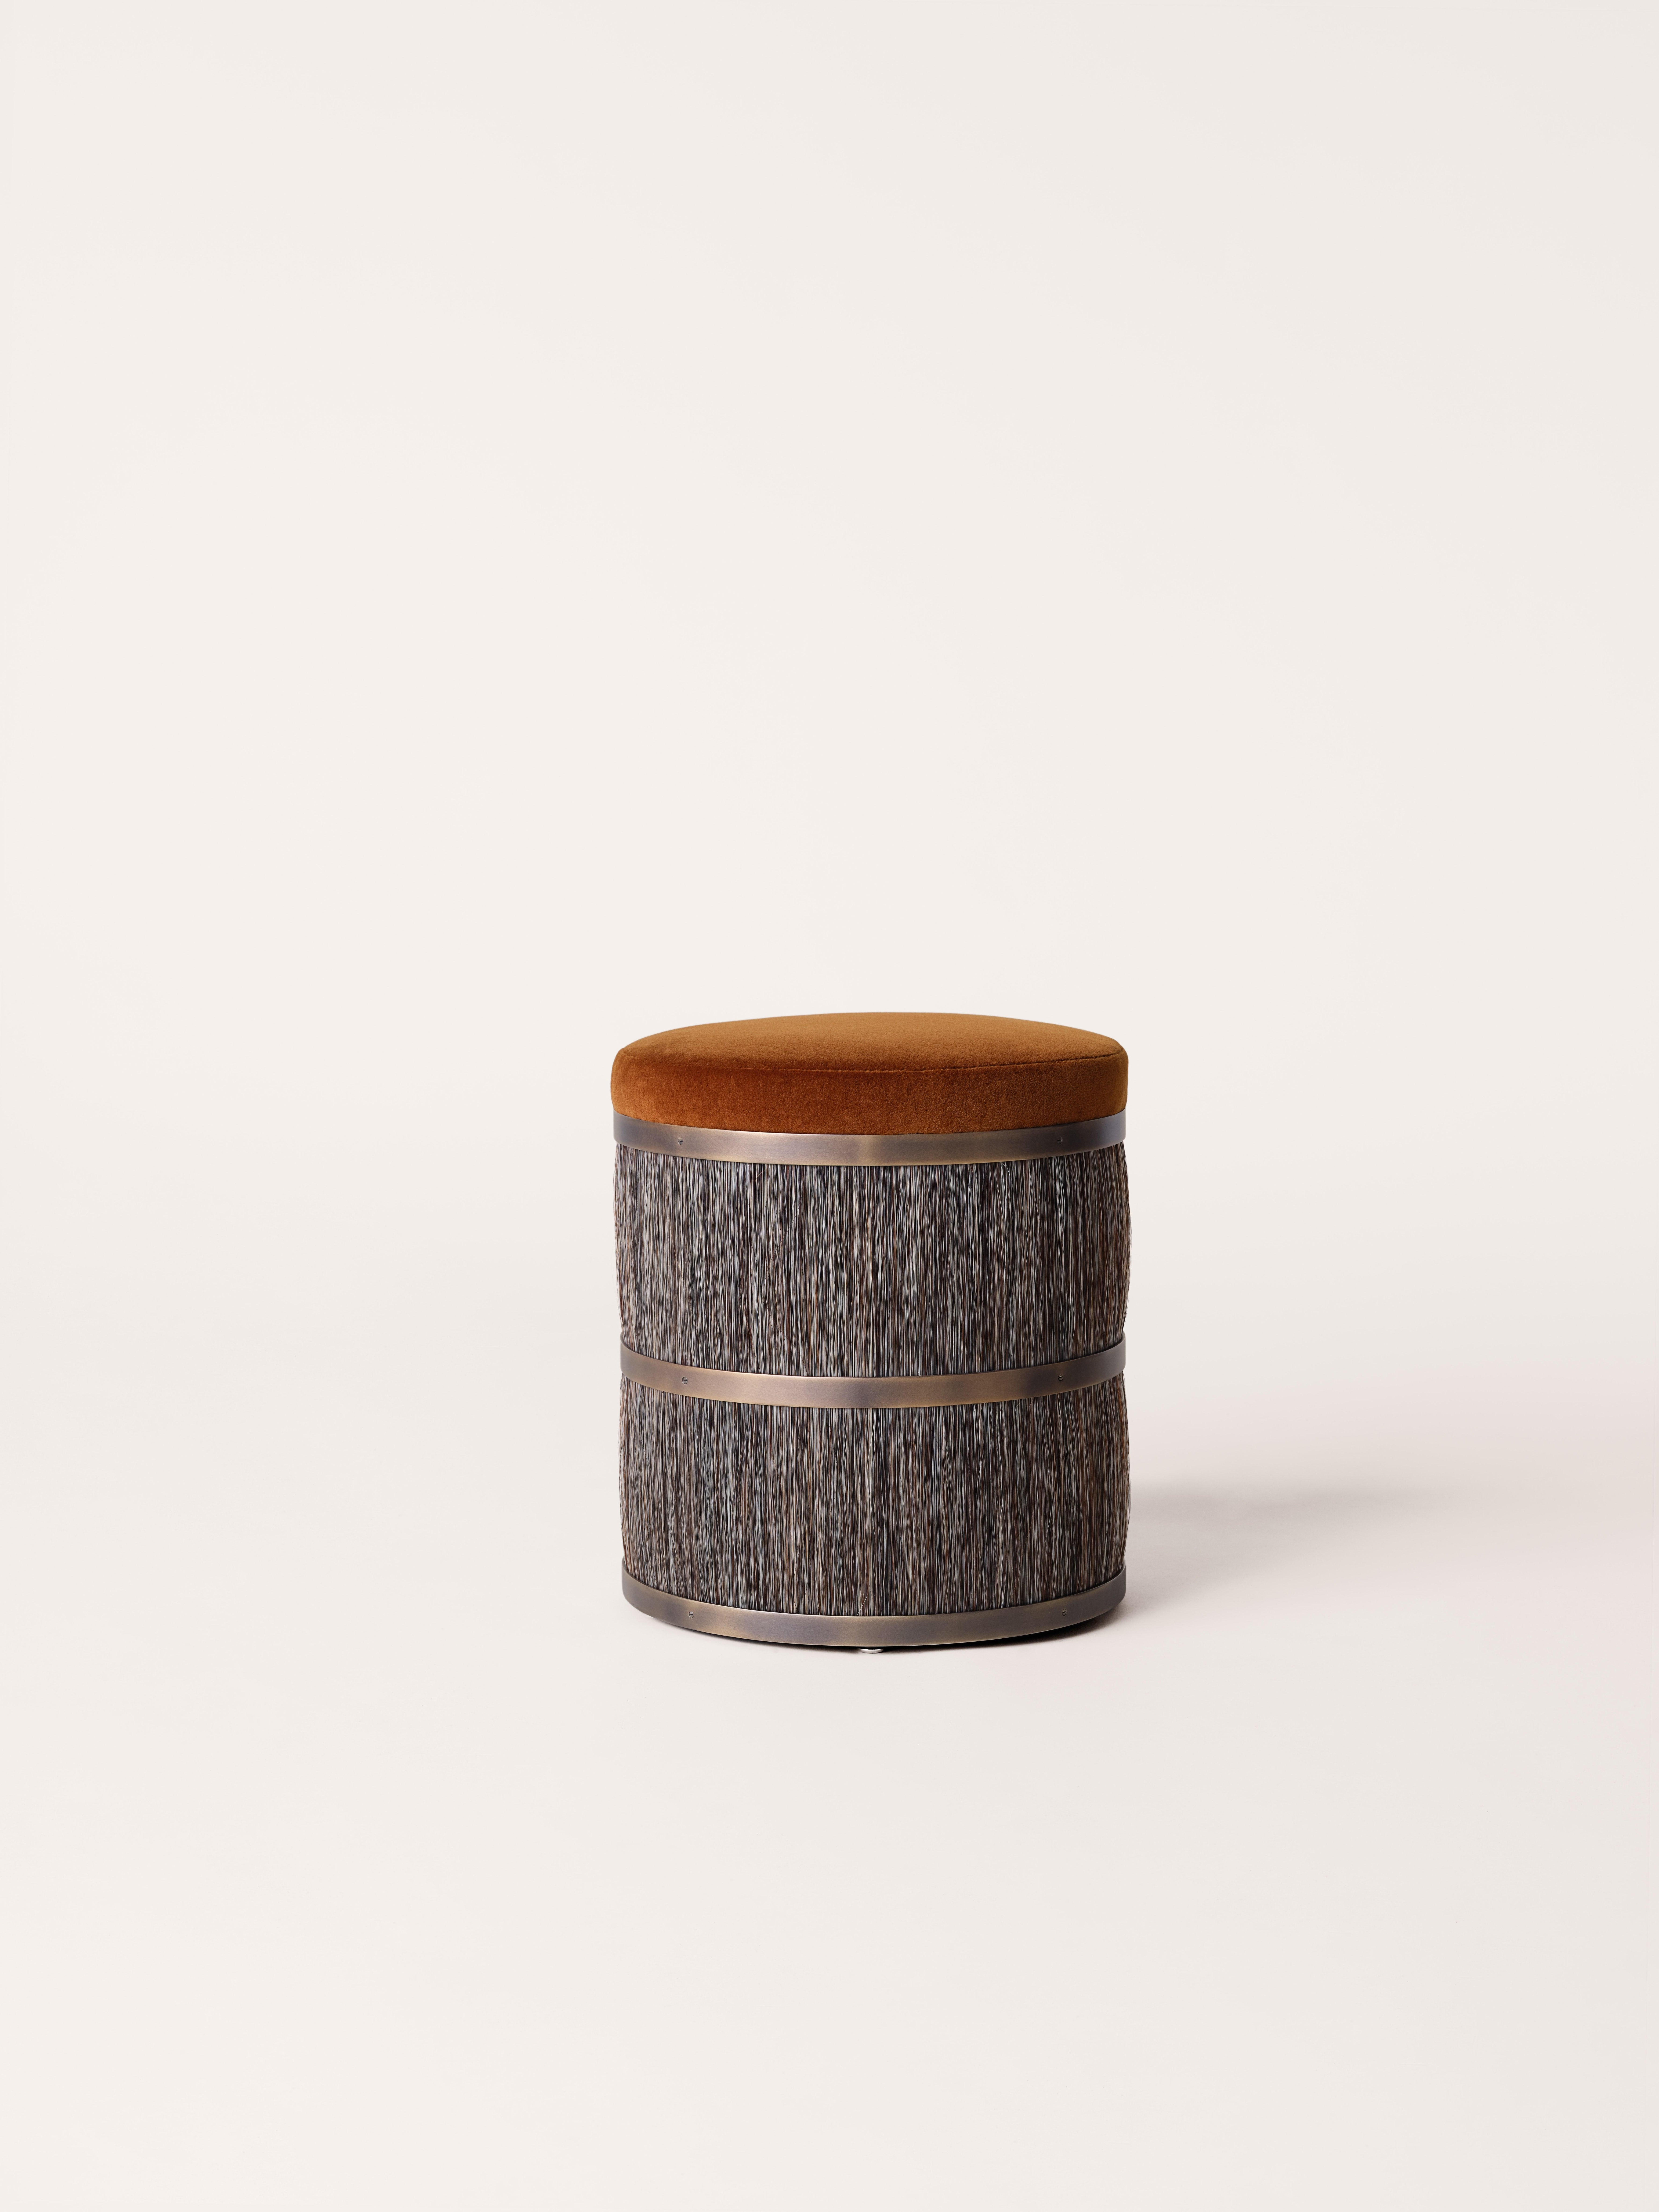 The Thing Stools are available in four different styles and feature upholstered velvet tops, solid brass rings and horse hair. 

The Thing 2 Stool is made to order with graded-in velvet or COM/COL. Please inquire for velvet color options, or pricing